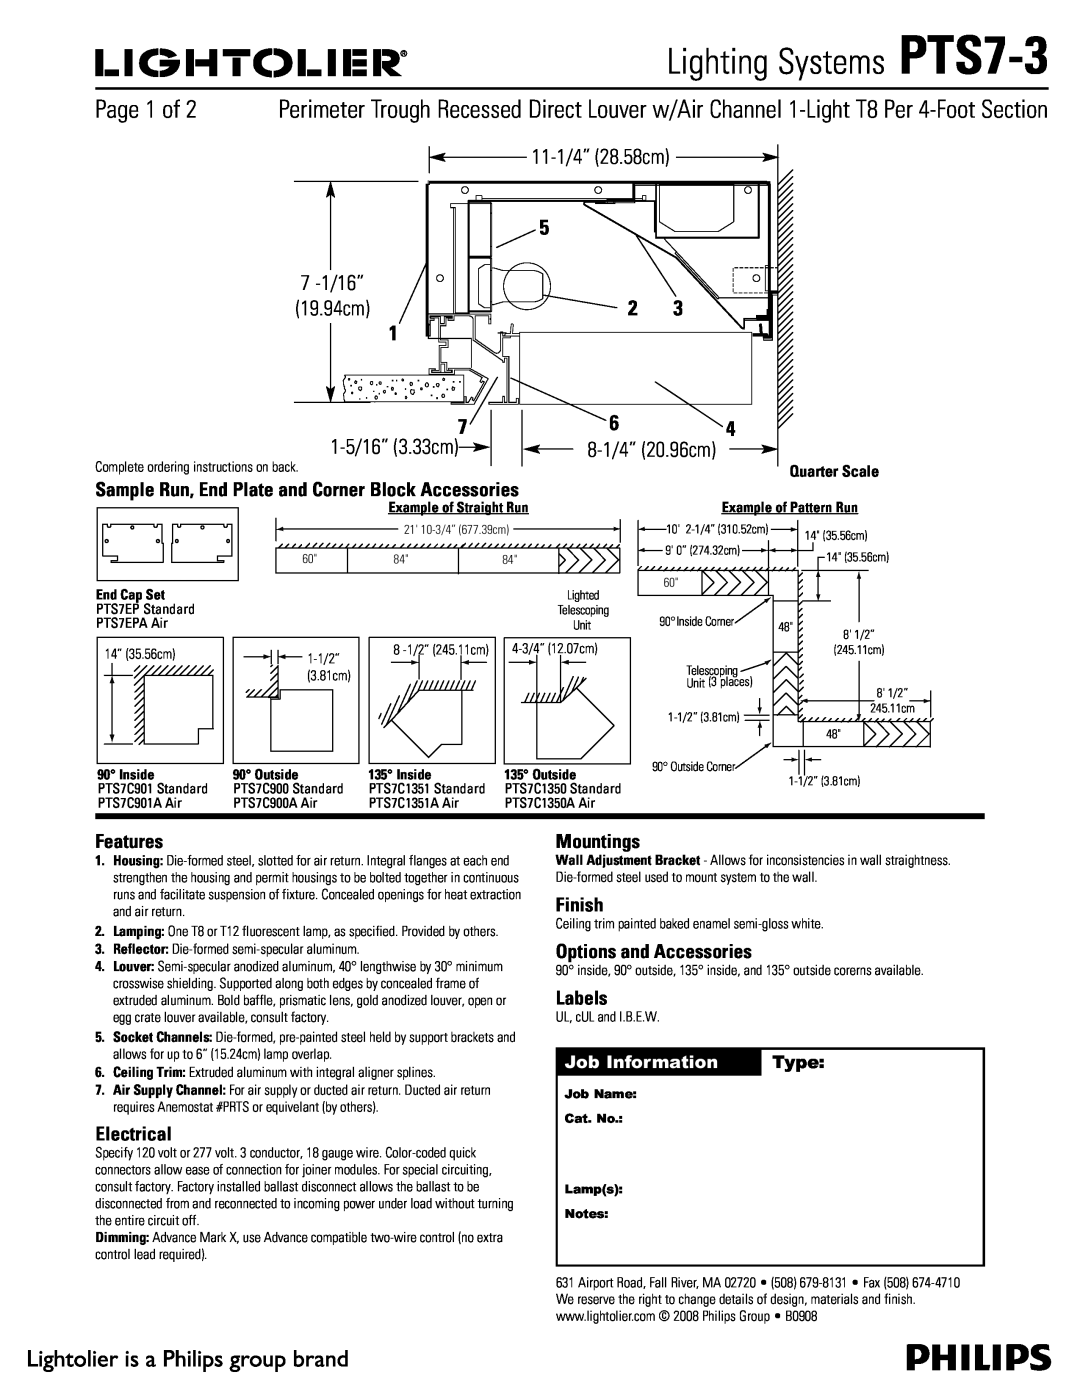 Lightolier manual Lighting Systems PTS7-3, Features, Electrical, Mountings, Finish, Options and Accessories, Labels 